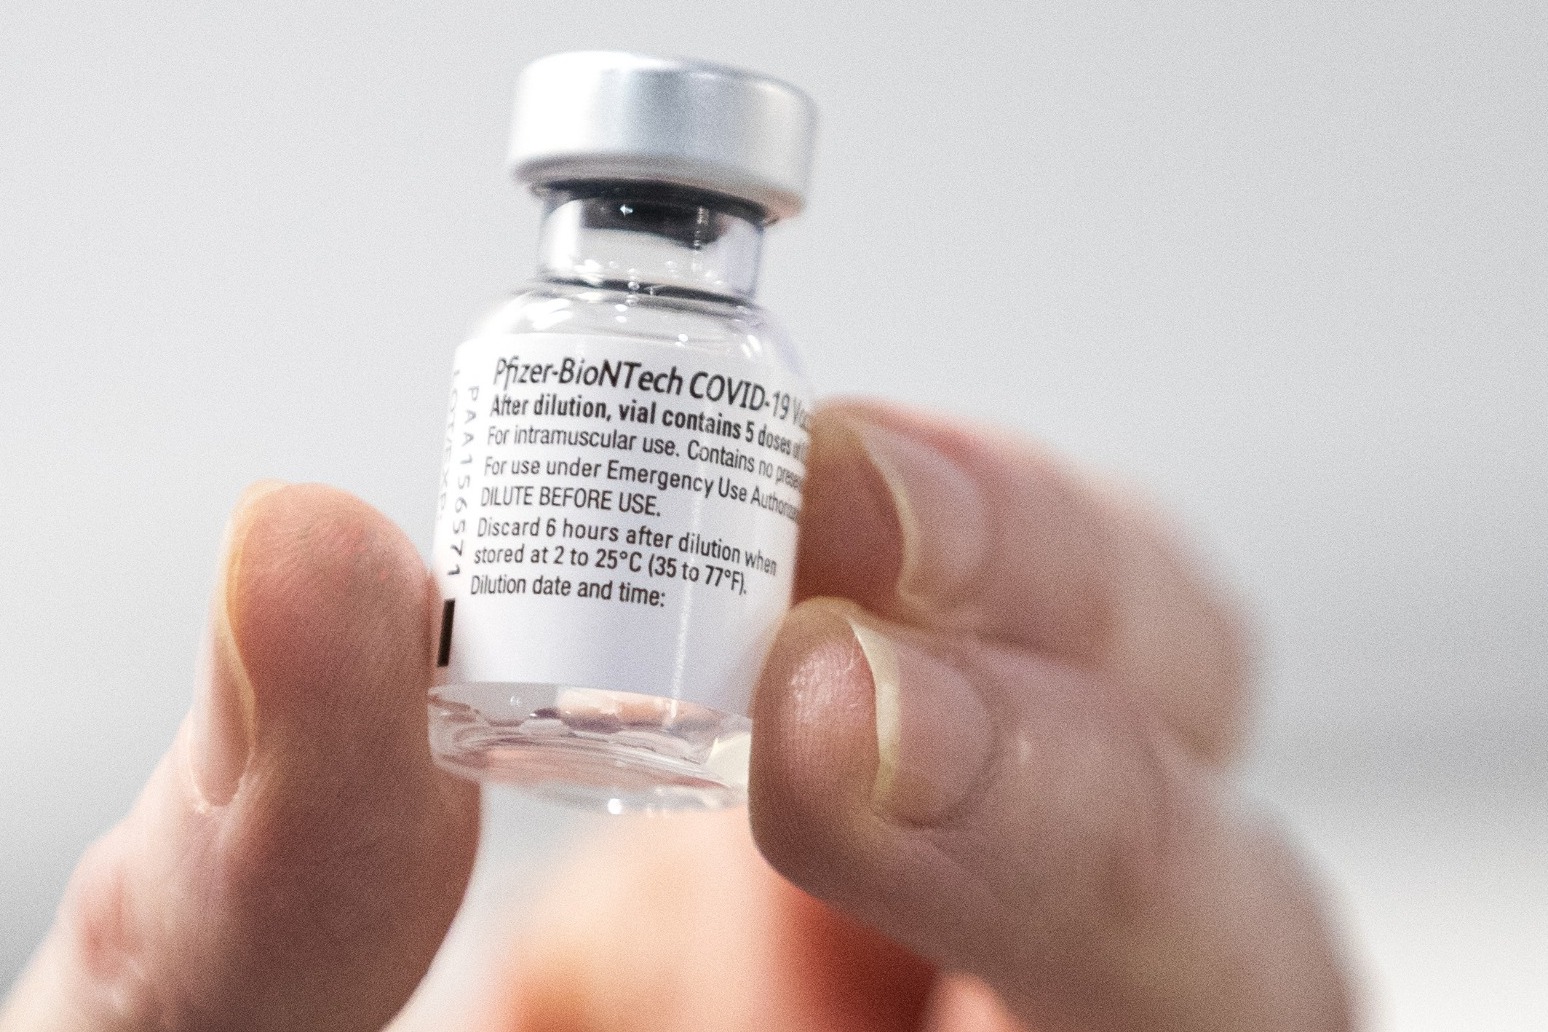 Vaccine rollout – are we ahead of schedule? 